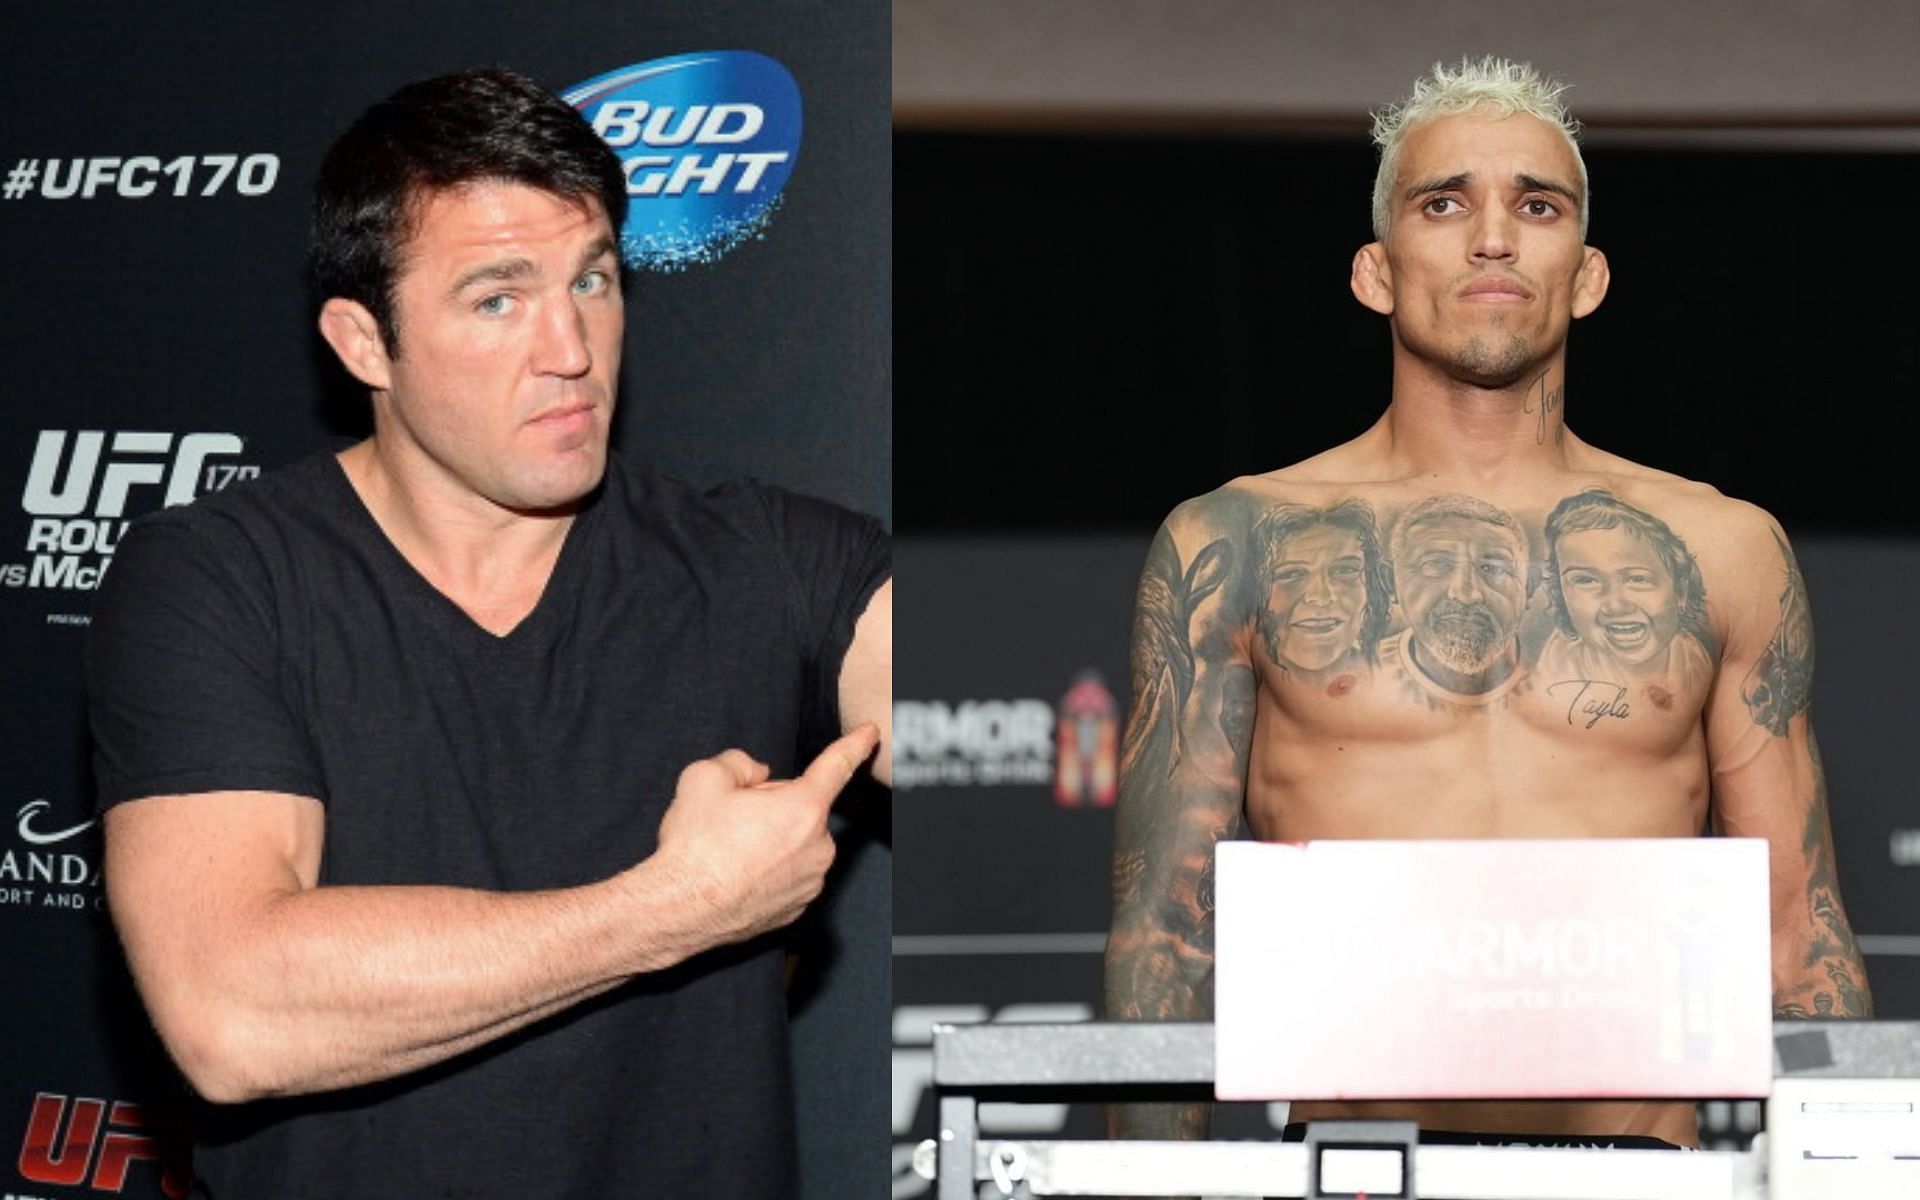 Chael Sonnen (left) and Charles Oliveira [Image Courtesy: @ufc on Instagram]